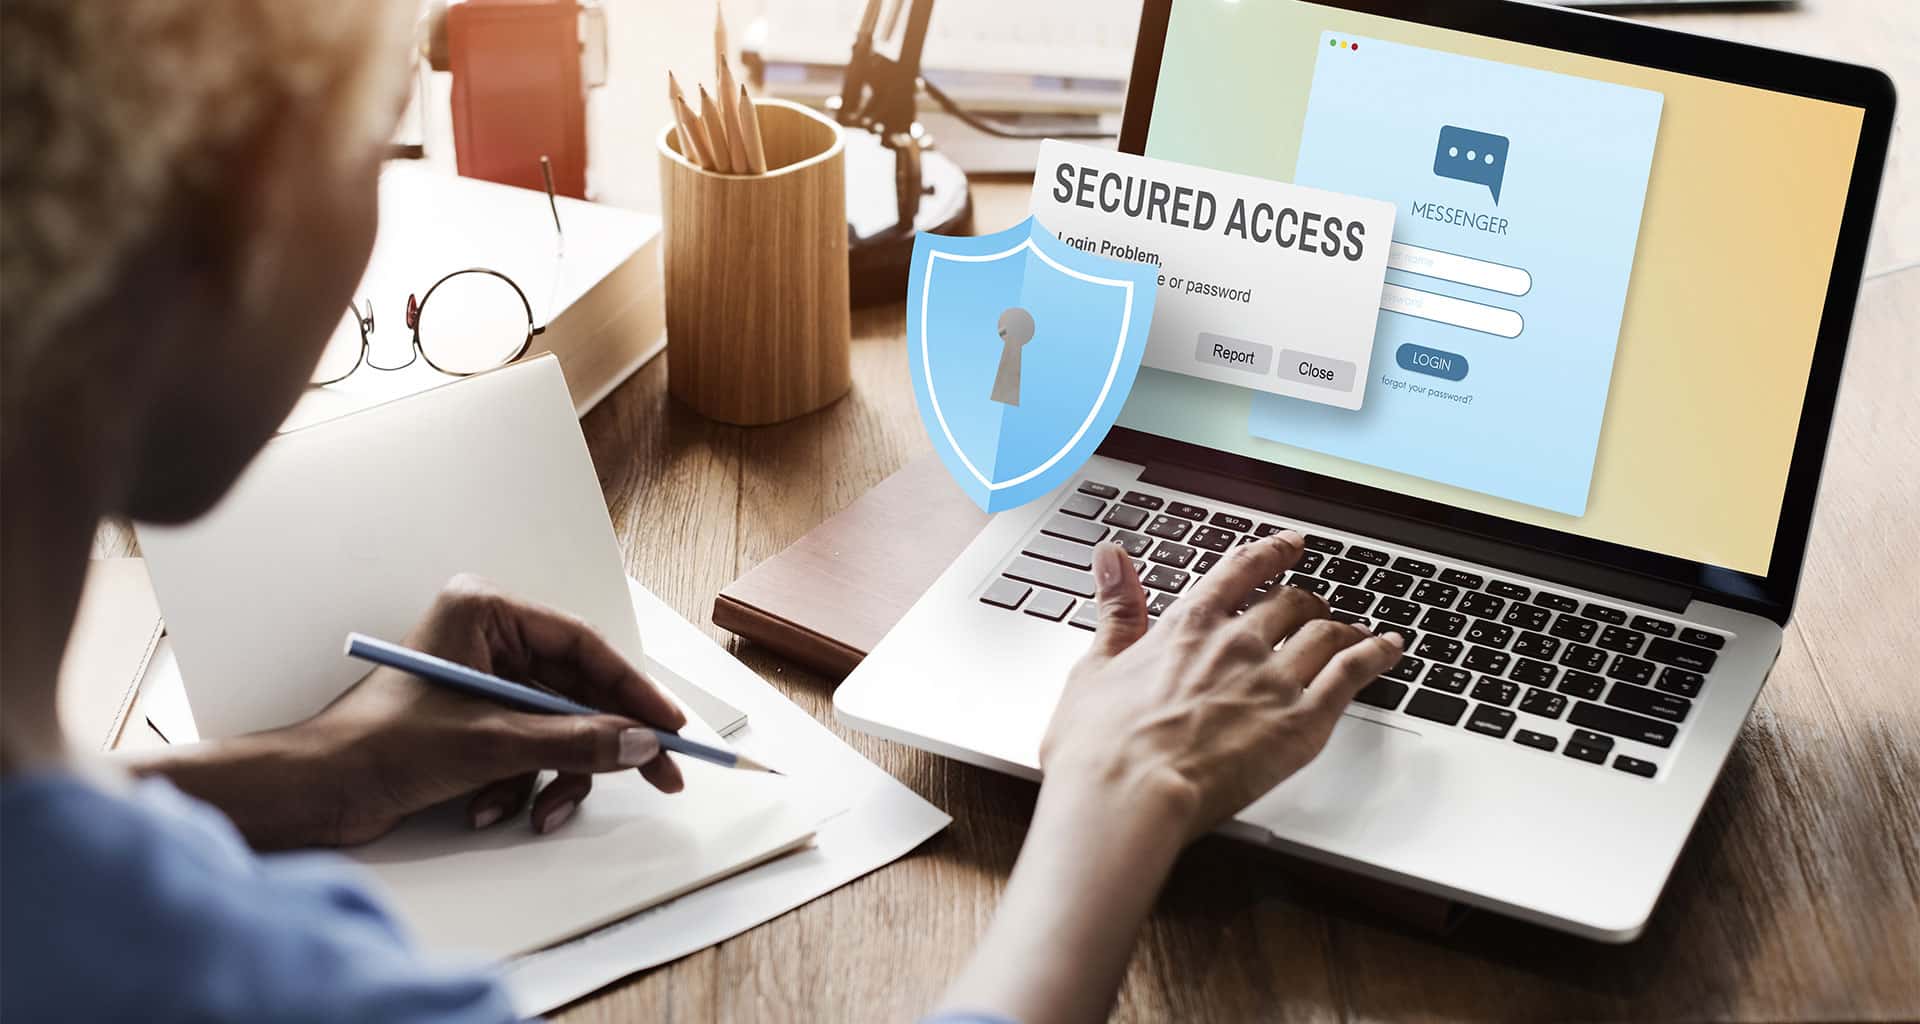 Secure access protection in an online security system illustrates the ways to protect your data in coworking spaces.